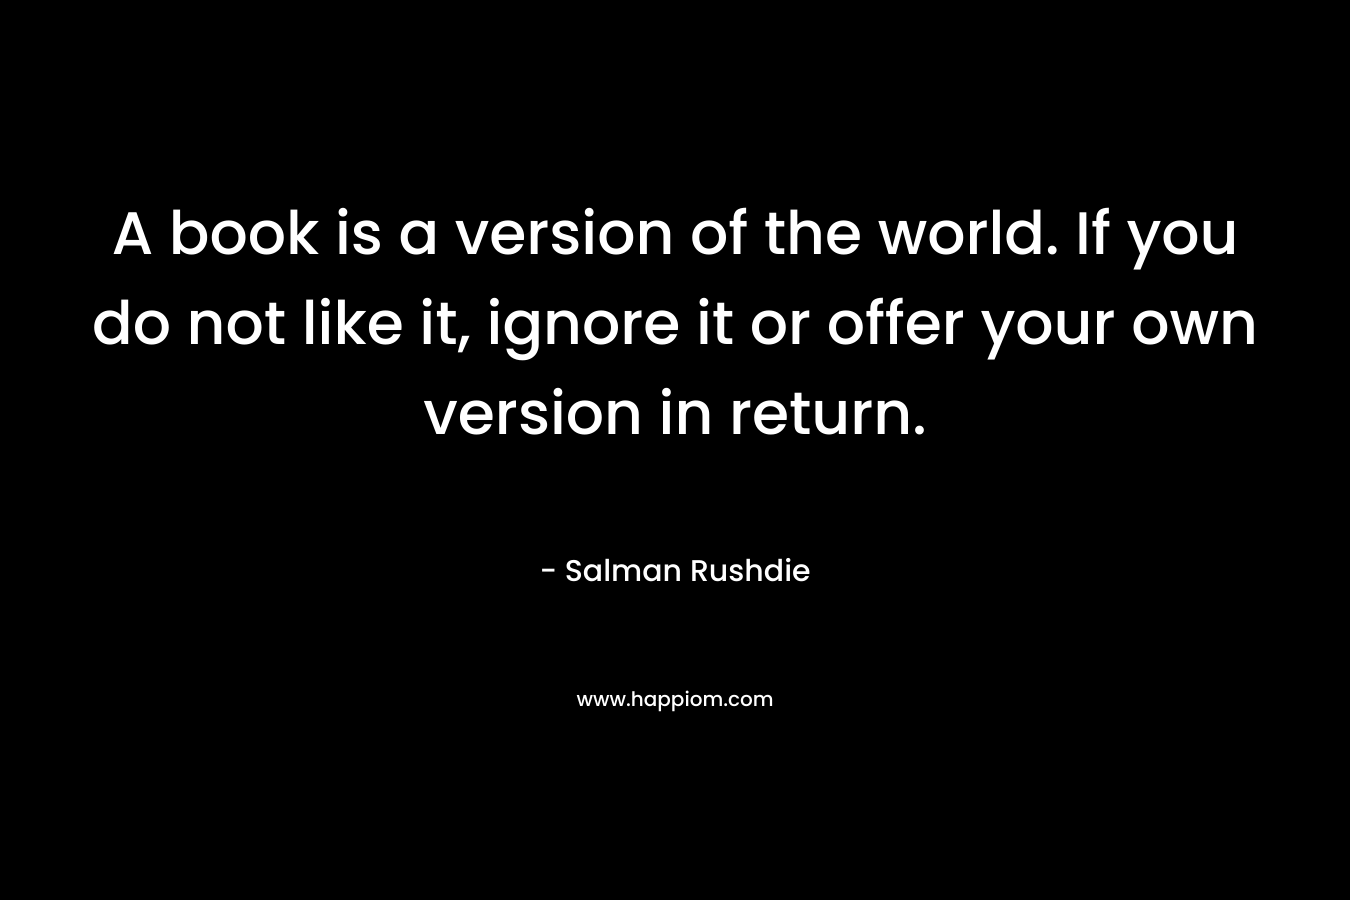 A book is a version of the world. If you do not like it, ignore it or offer your own version in return. – Salman Rushdie